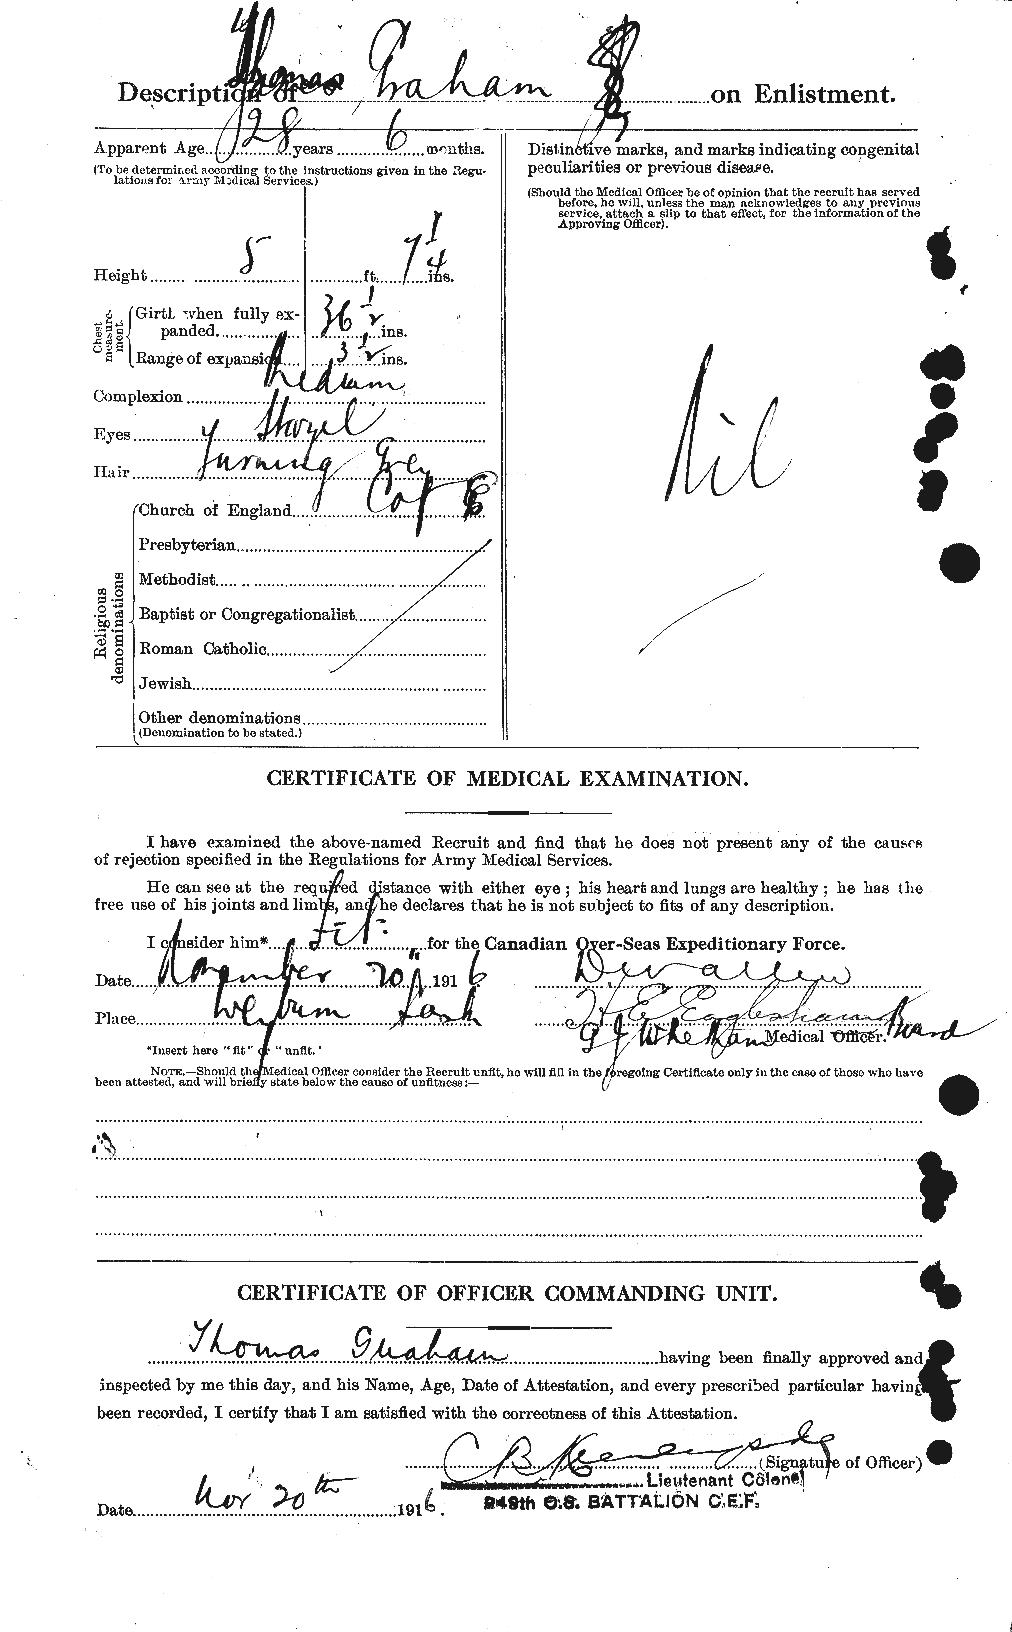 Personnel Records of the First World War - CEF 359500b